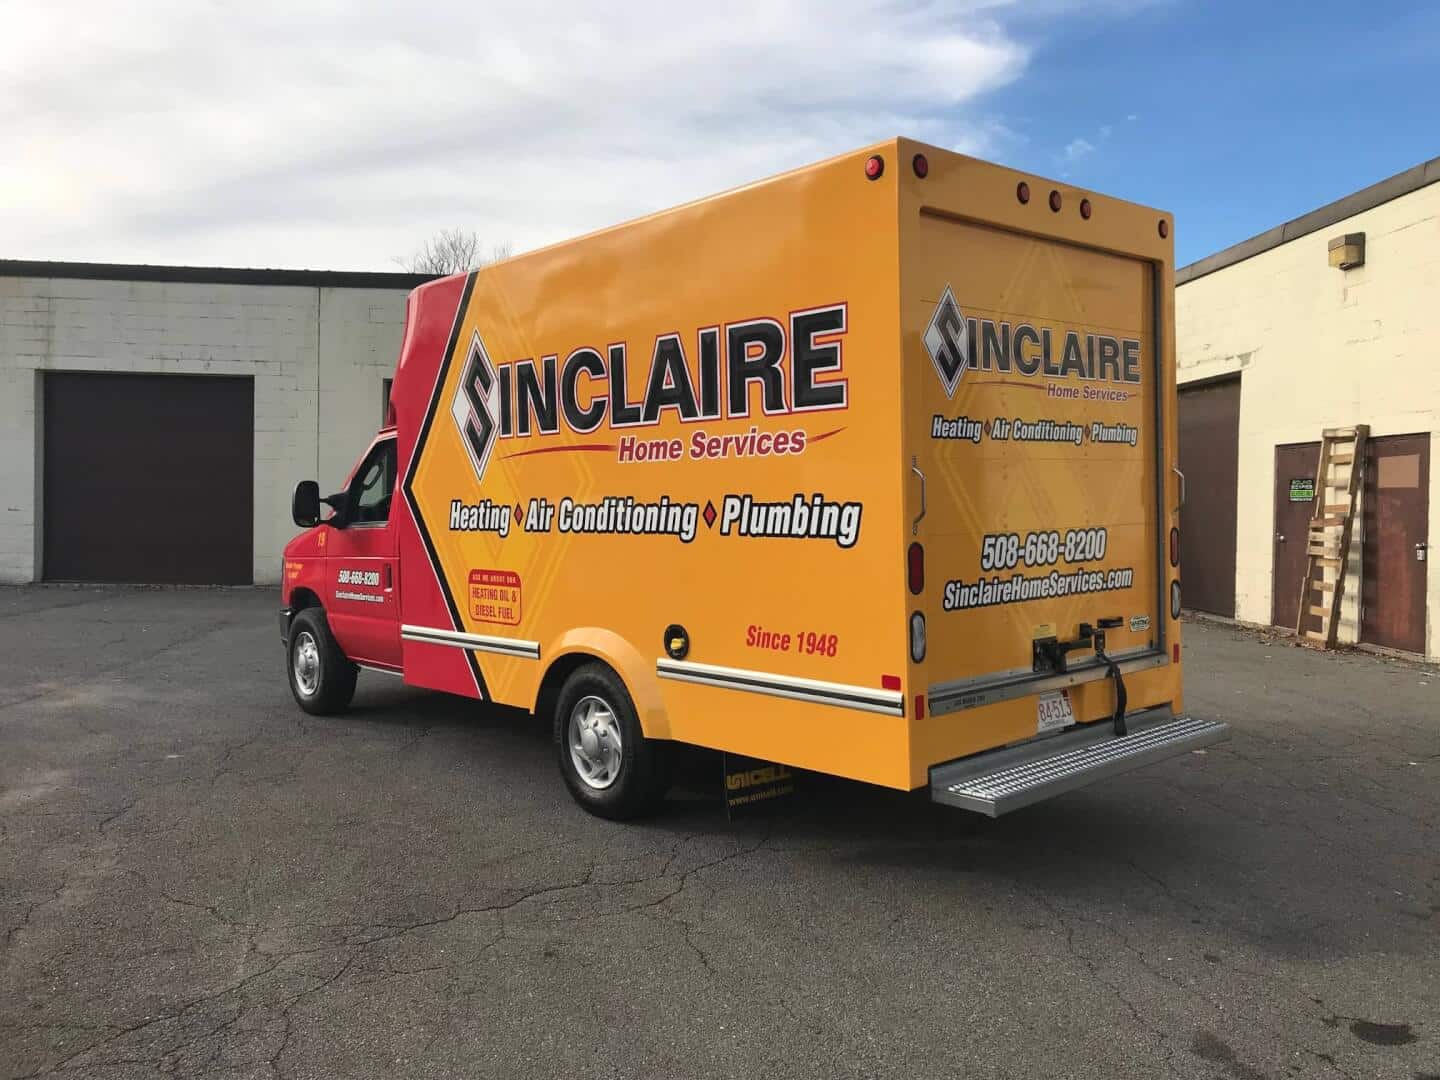 Sinclaire Truck Parked Outside